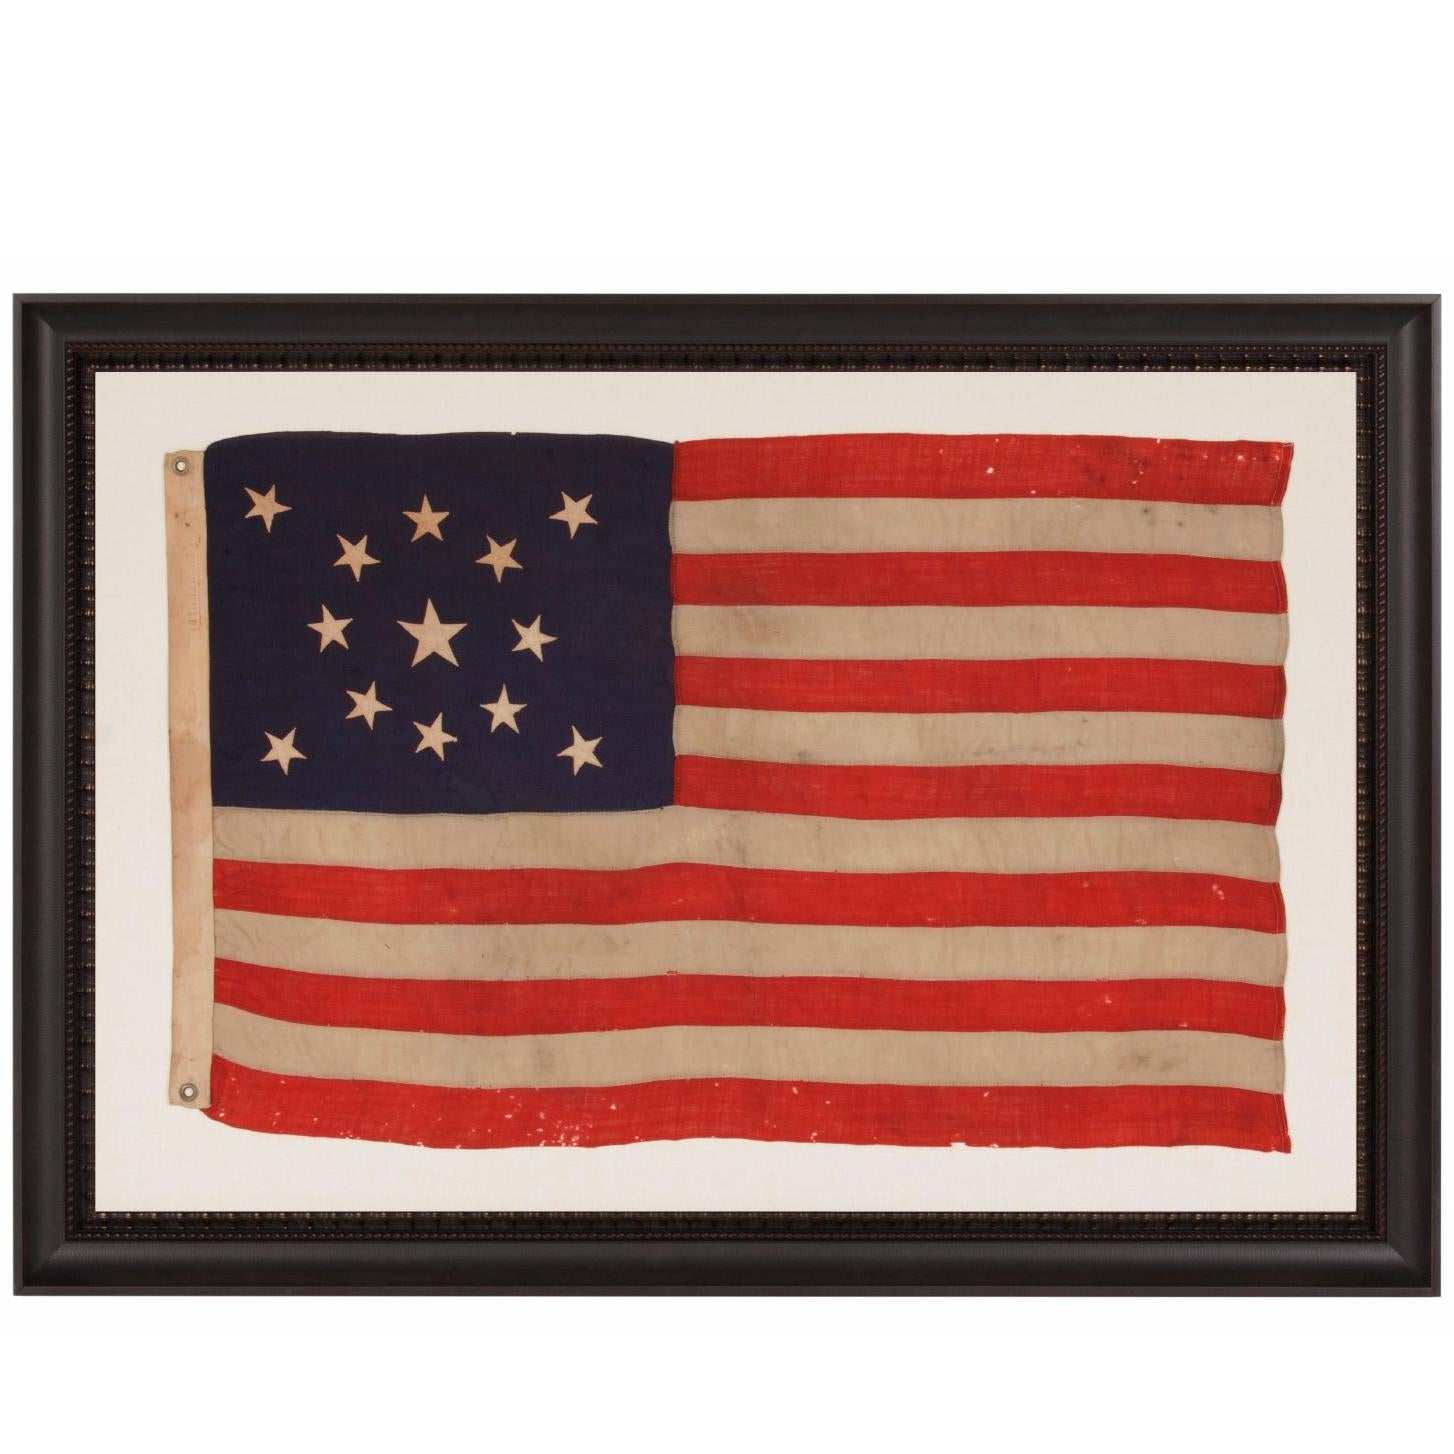 13 Stars in a Medallion Configuration on a Small Scale Antique American Flag